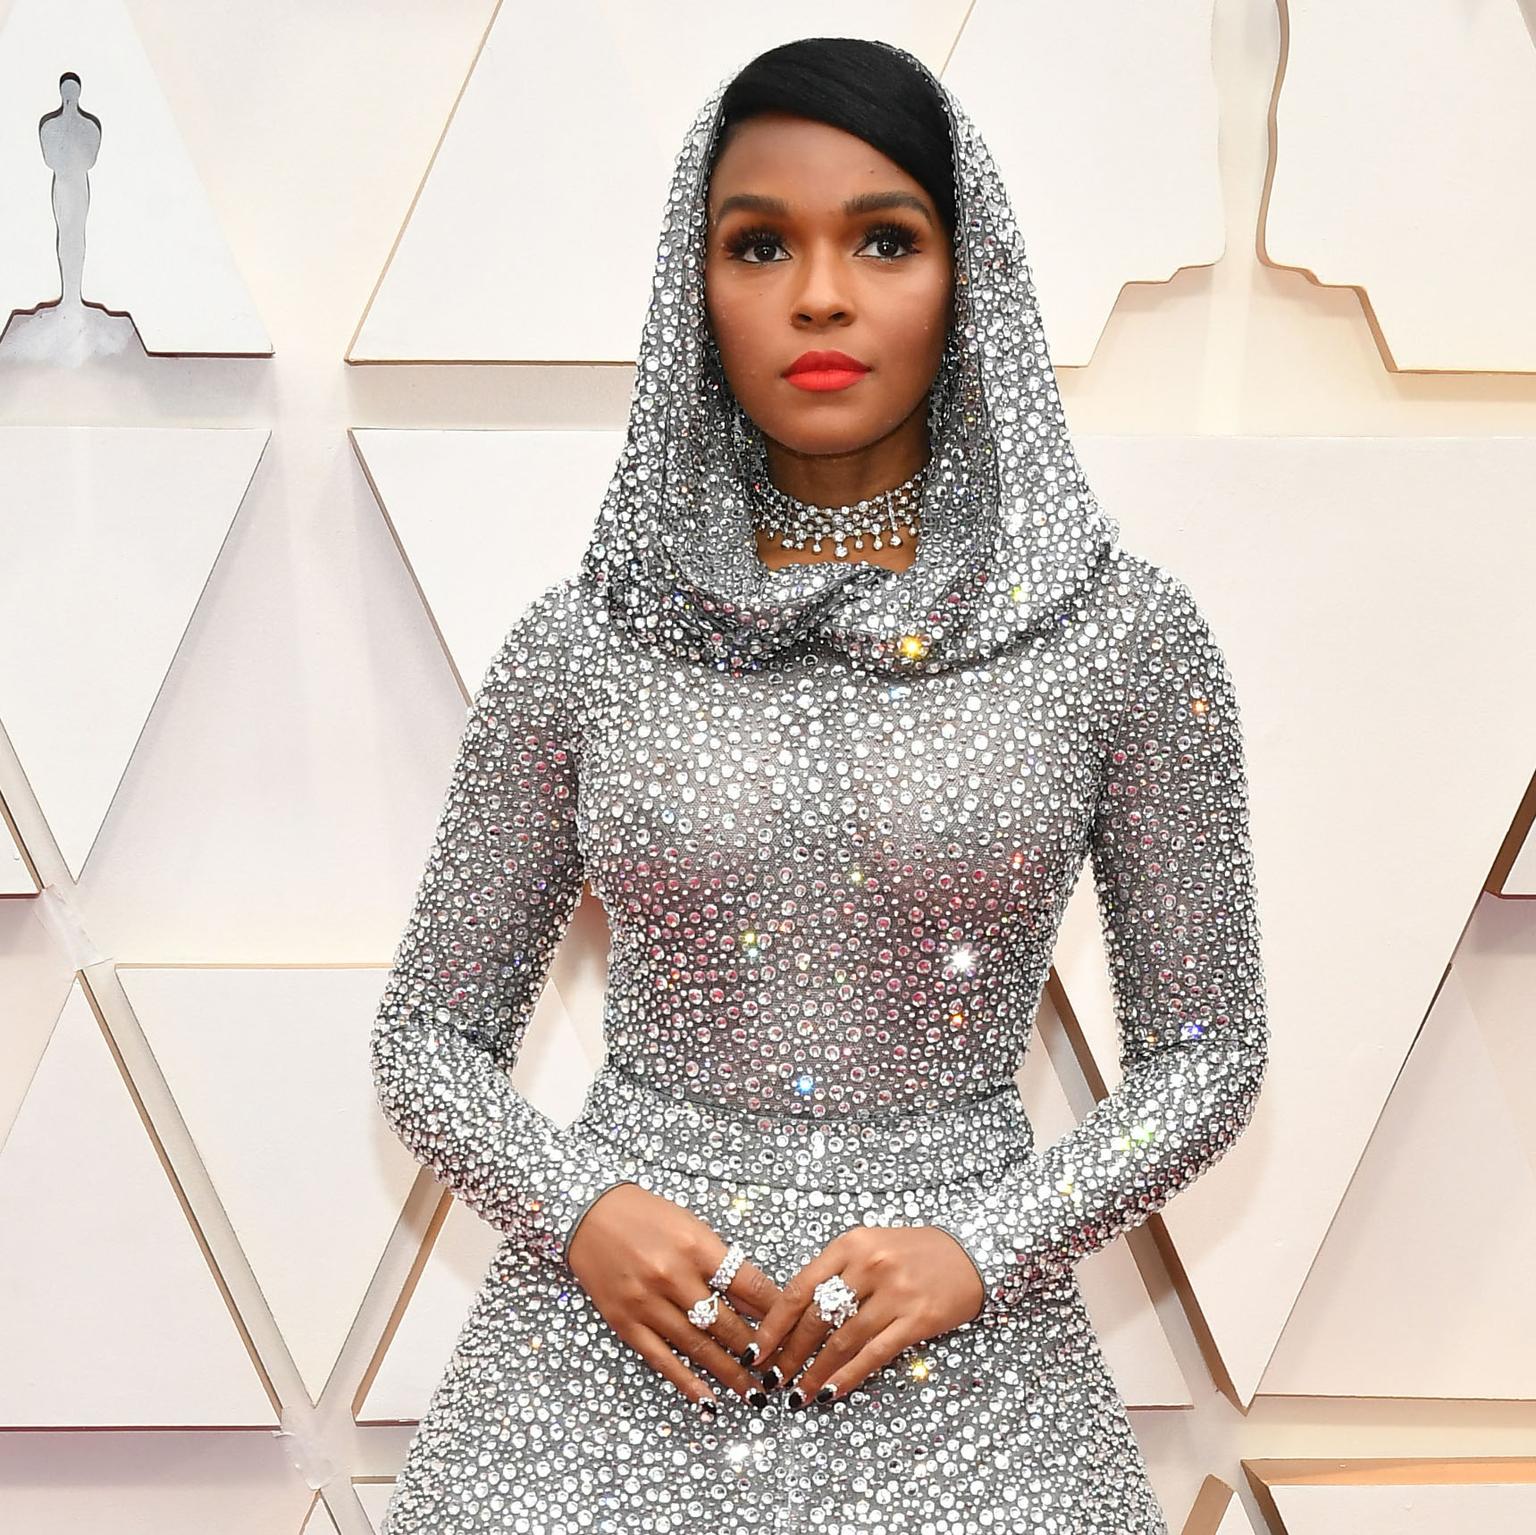 Janelle Monae in Forevermark at the 2020 Academy Awards